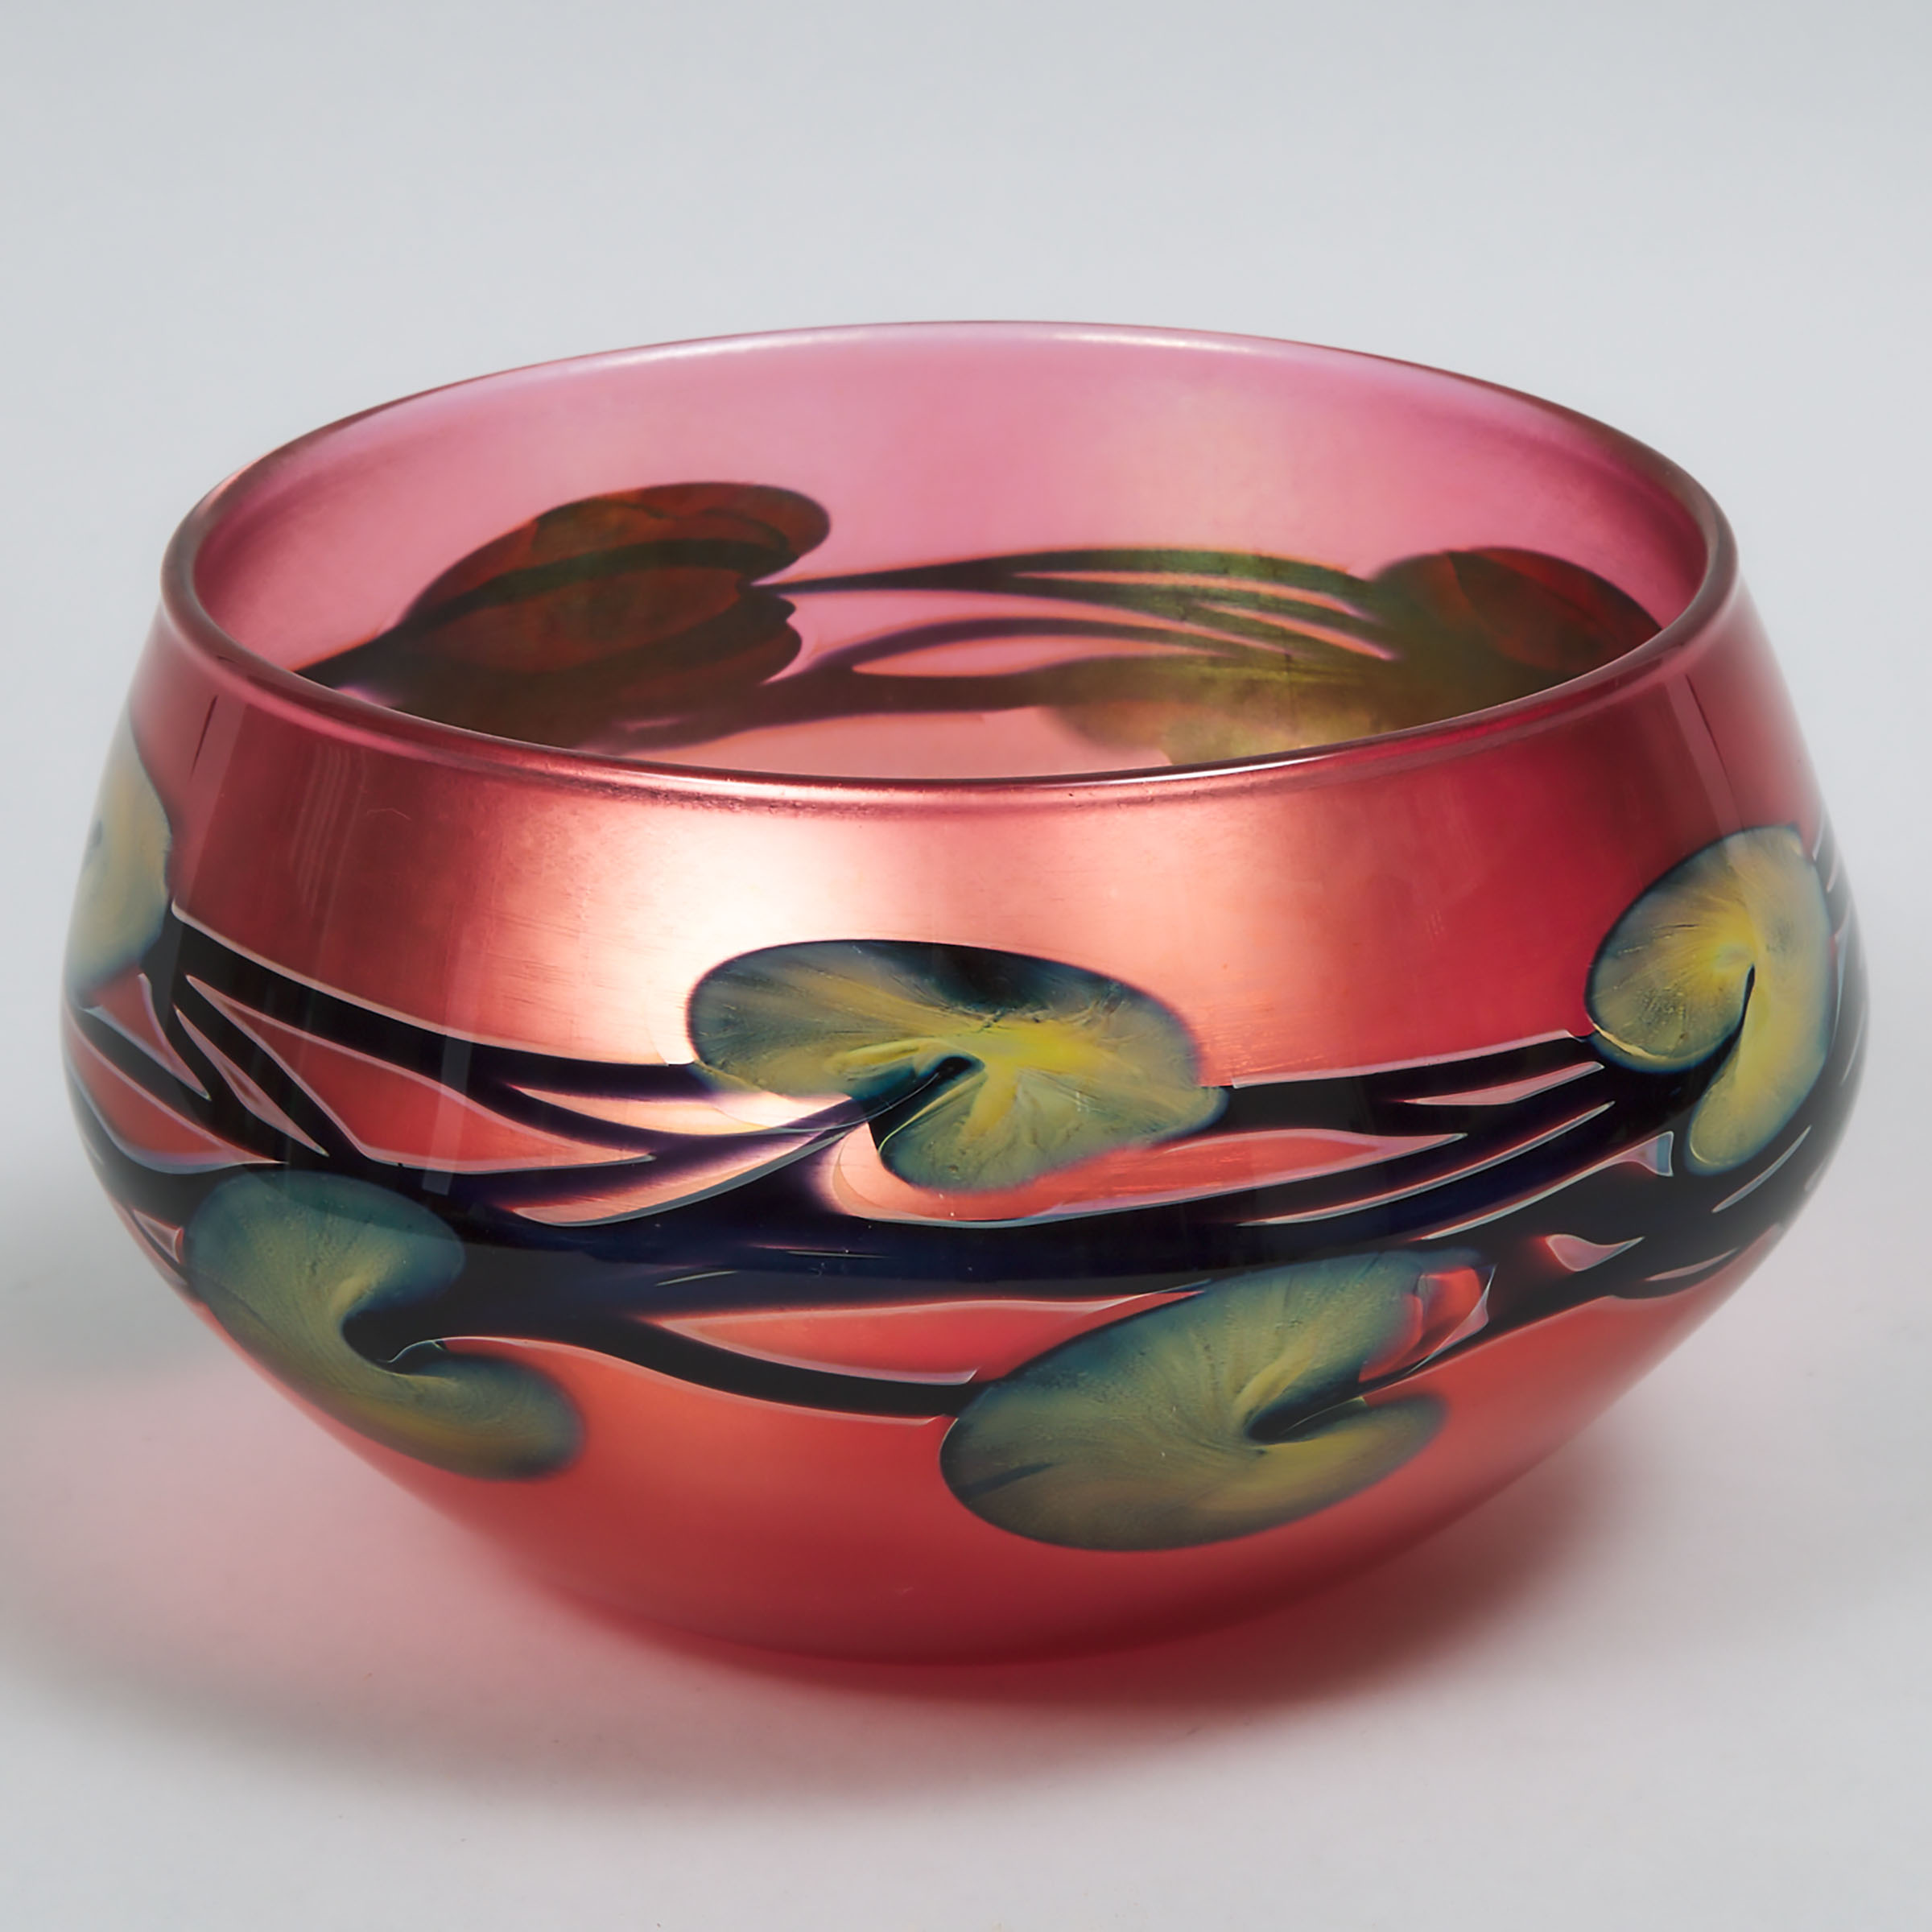 Charles Lotton (American, b.1935), Iridescent 'Leaf and Vine' Glass Bowl, dated 1986